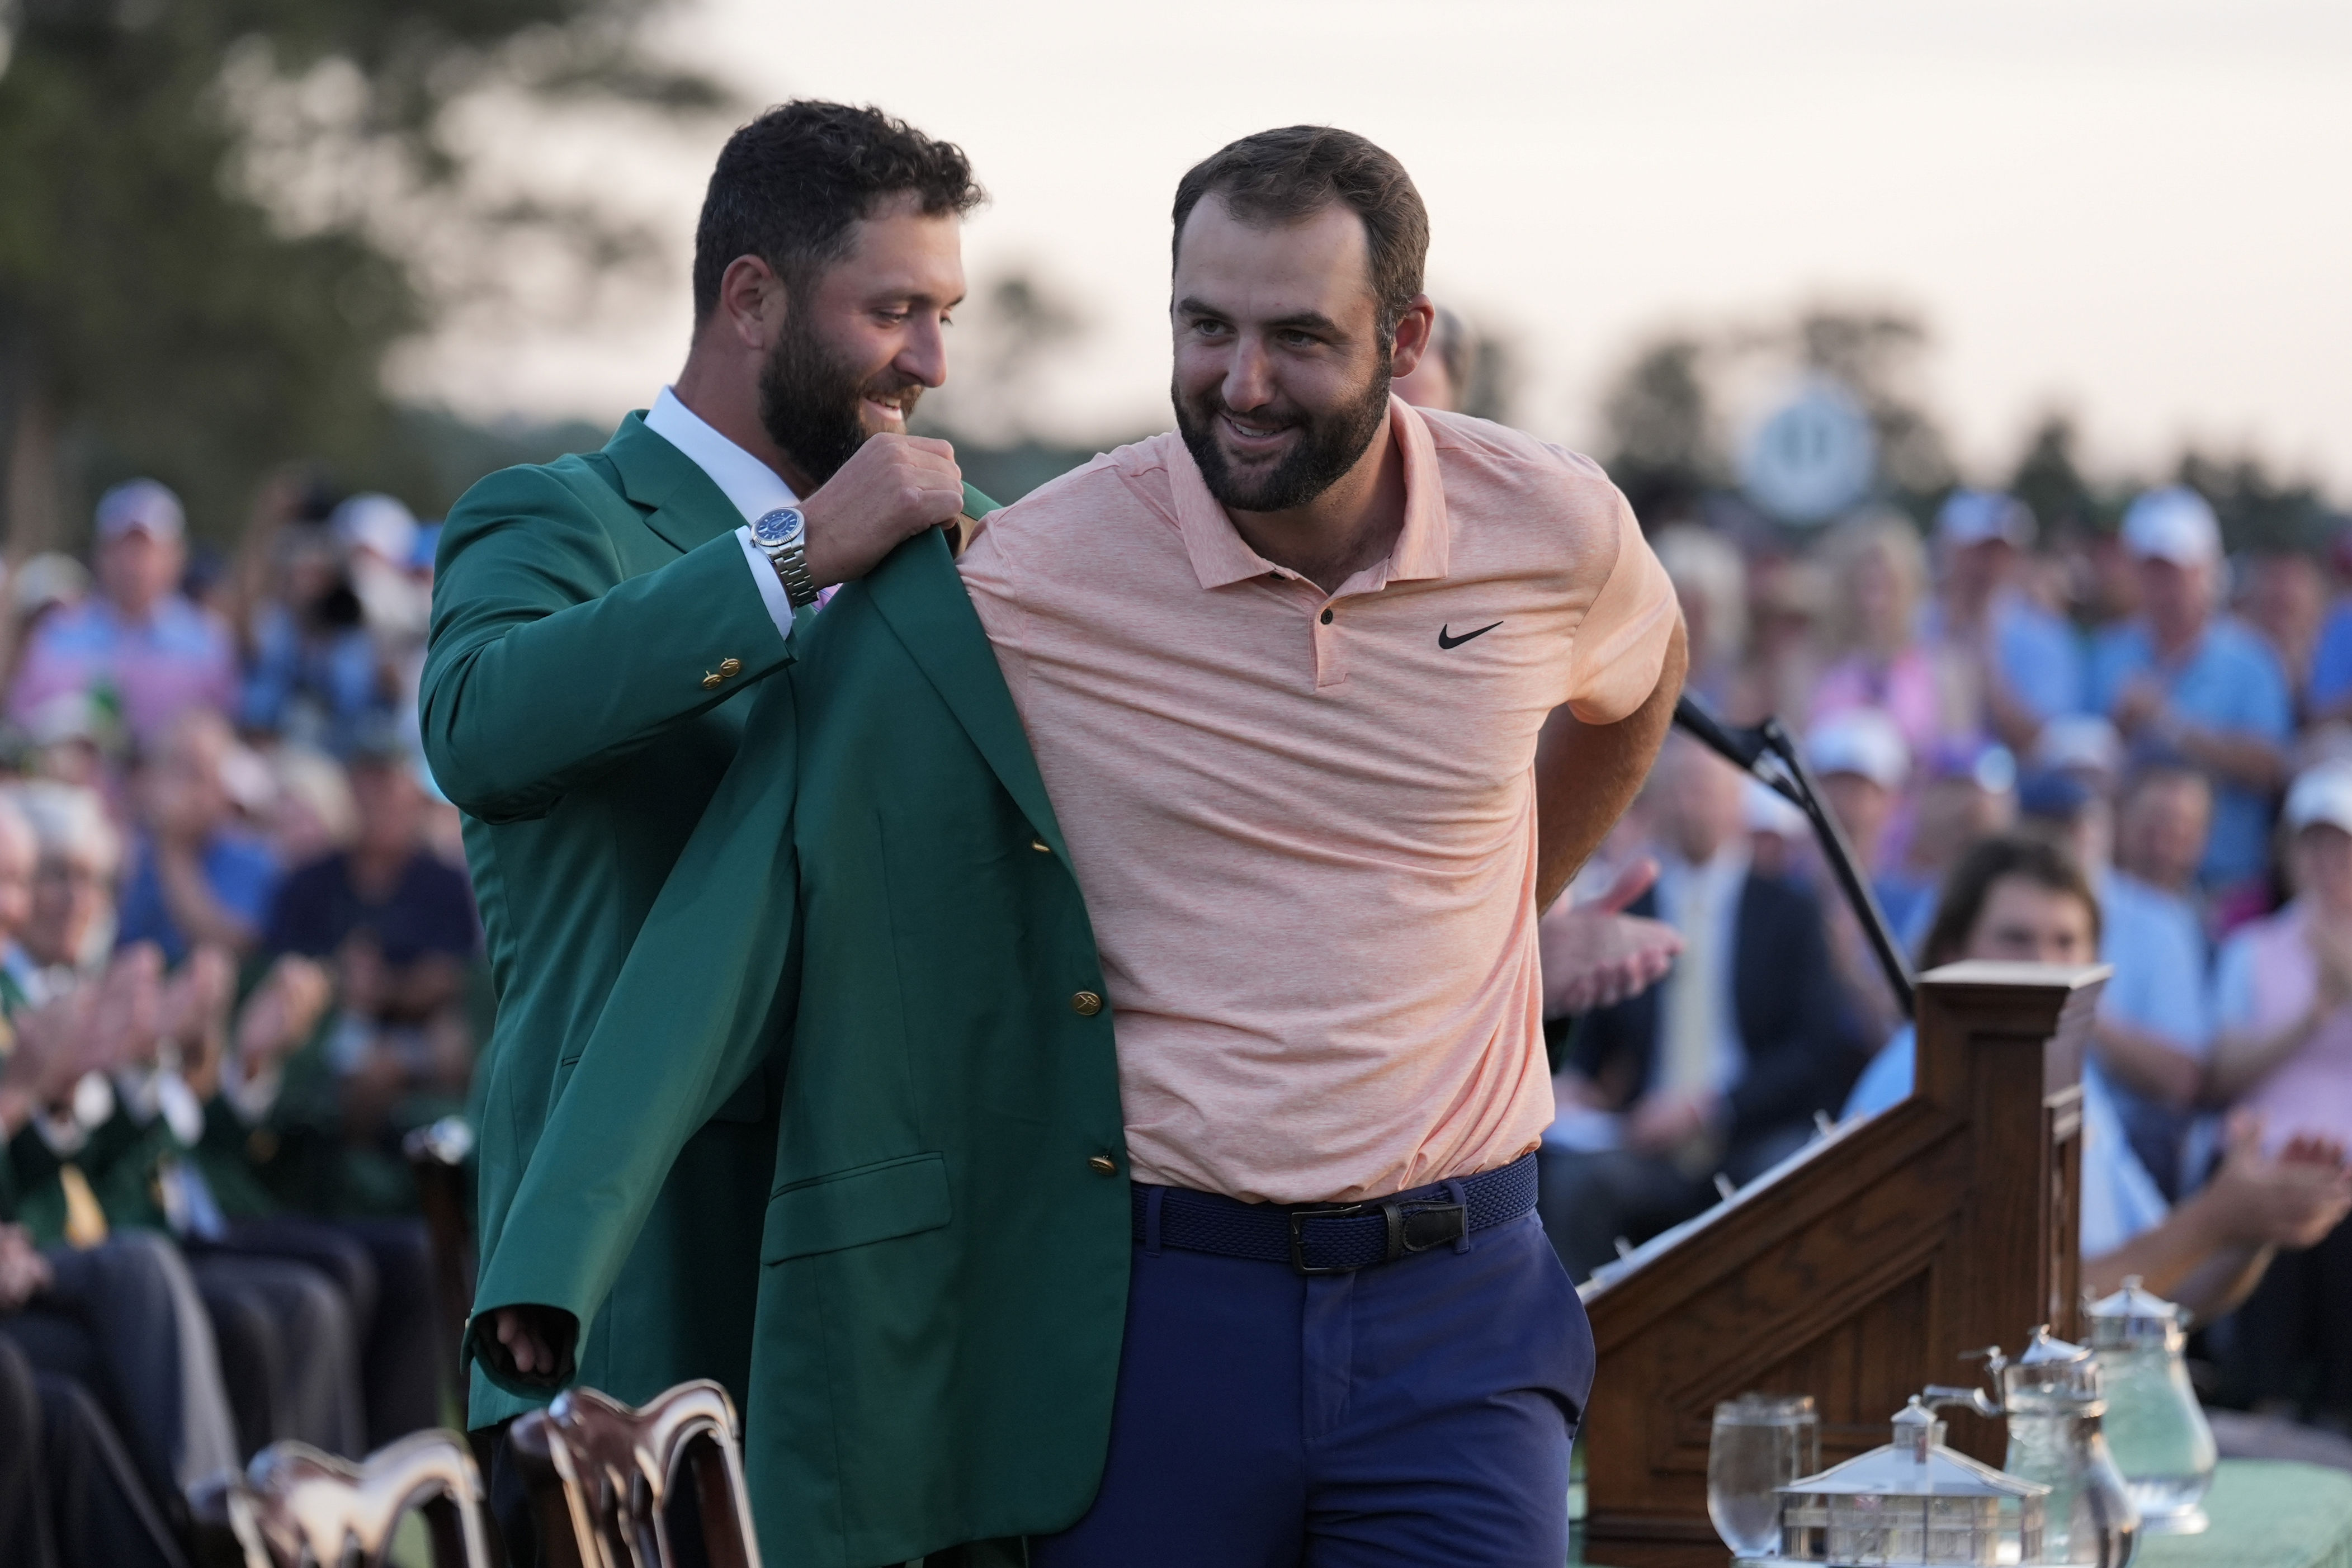 three guarantees: death, taxes and scottie scheffler at the masters